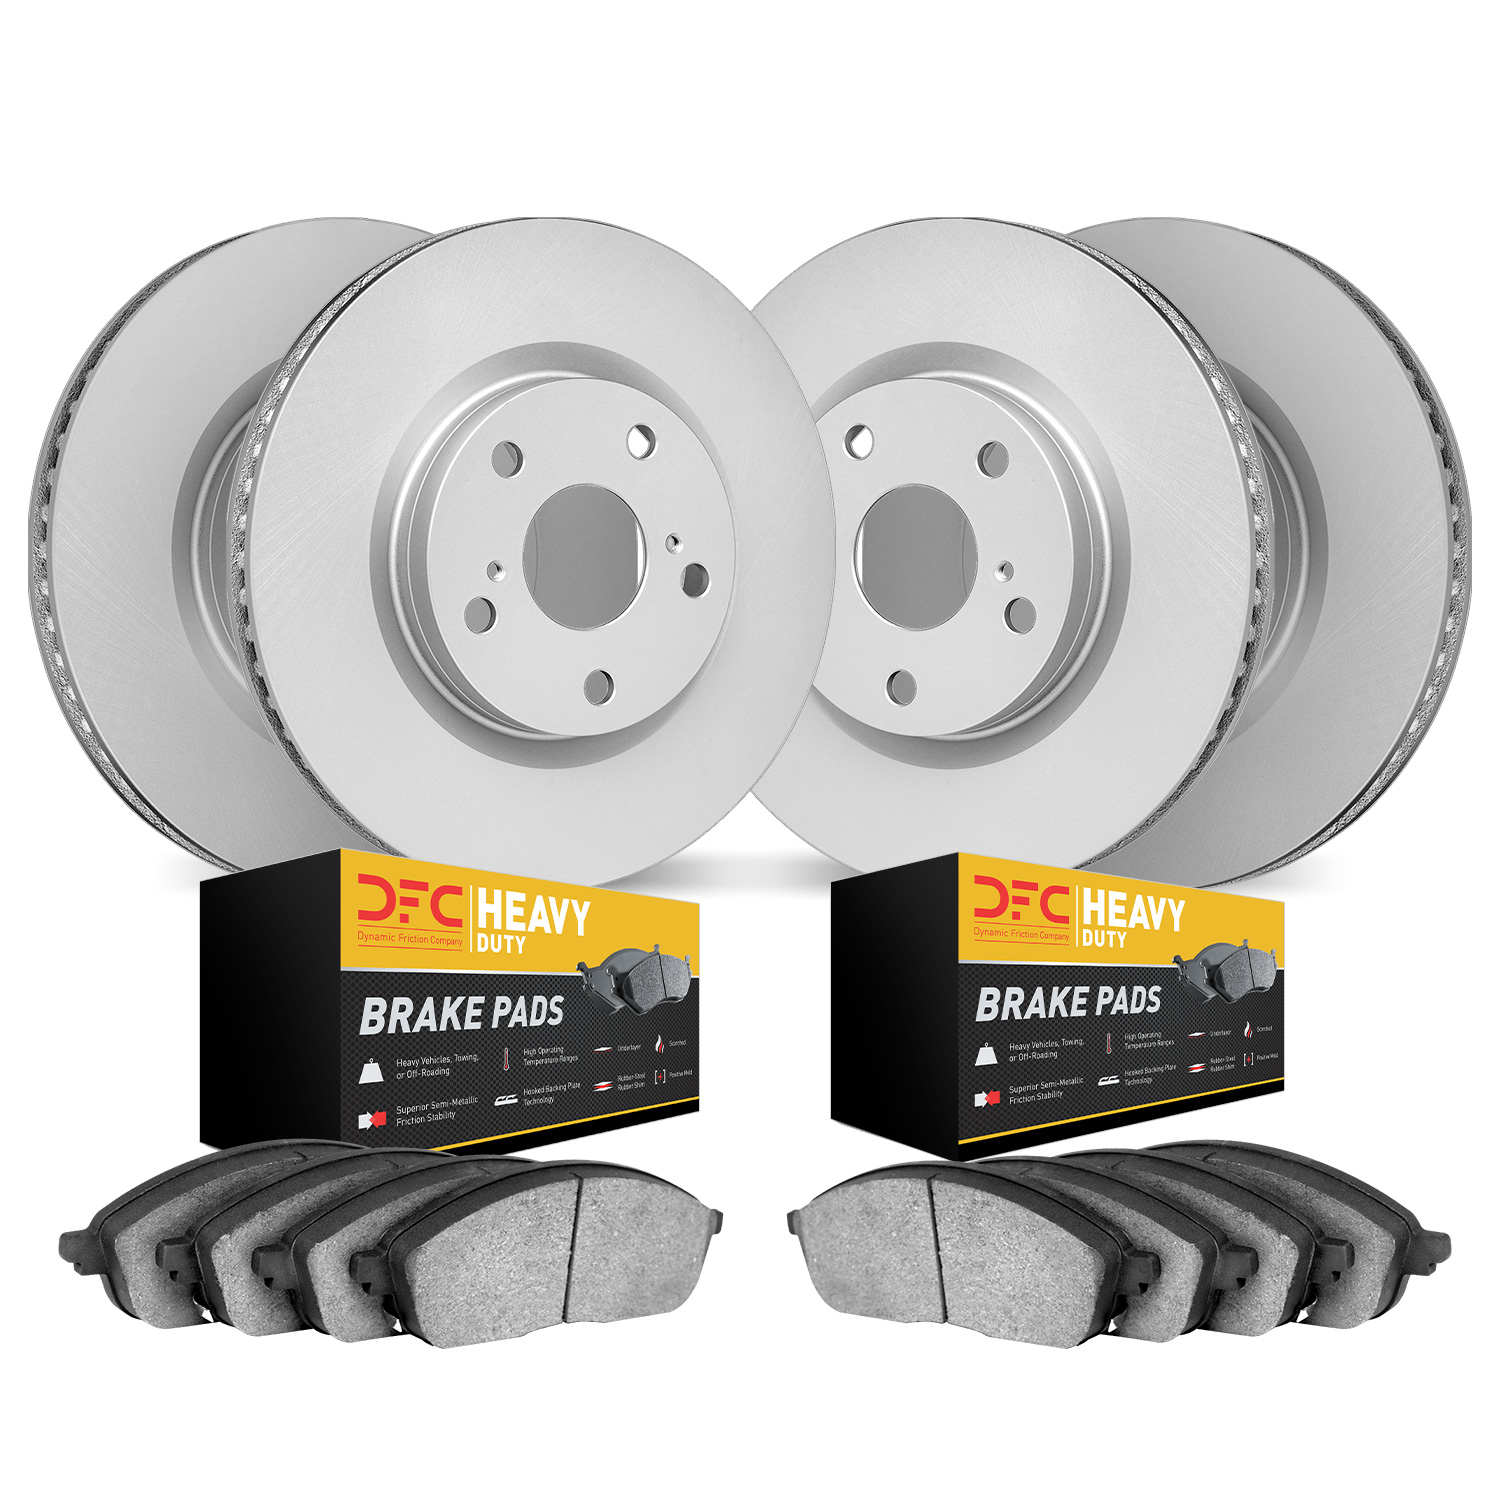 4204-54086 Geospec Brake Rotors w/Heavy-Duty Brake Pads Kit, 2013-2019 Ford/Lincoln/Mercury/Mazda, Position: Front and Rear